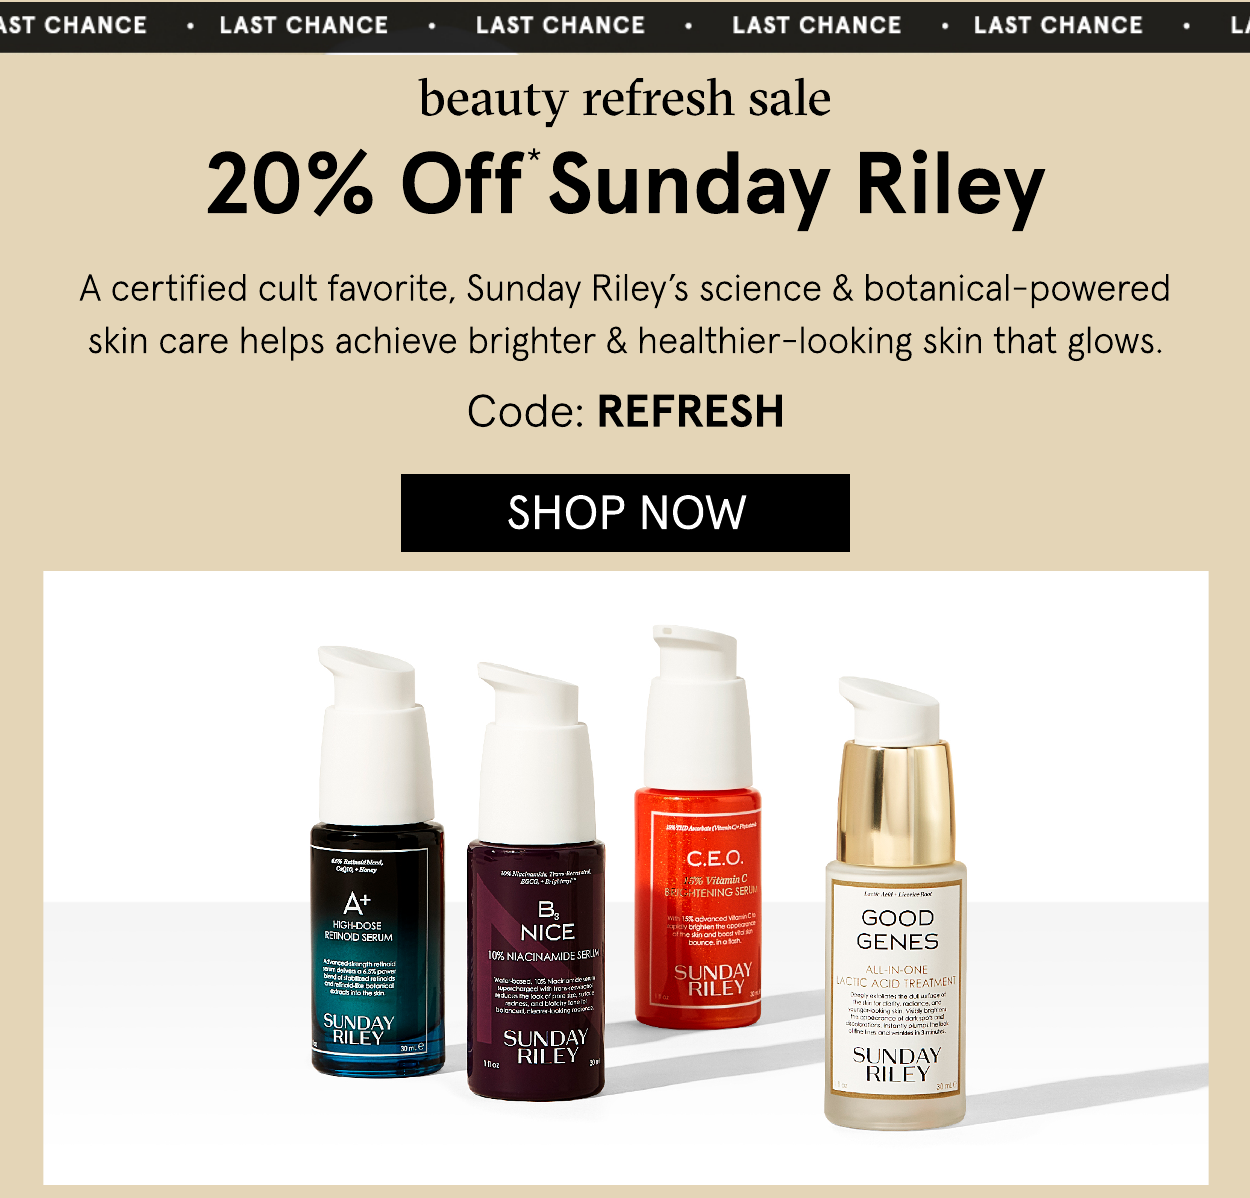 Sunday Riley 20% off with code: REFRESH